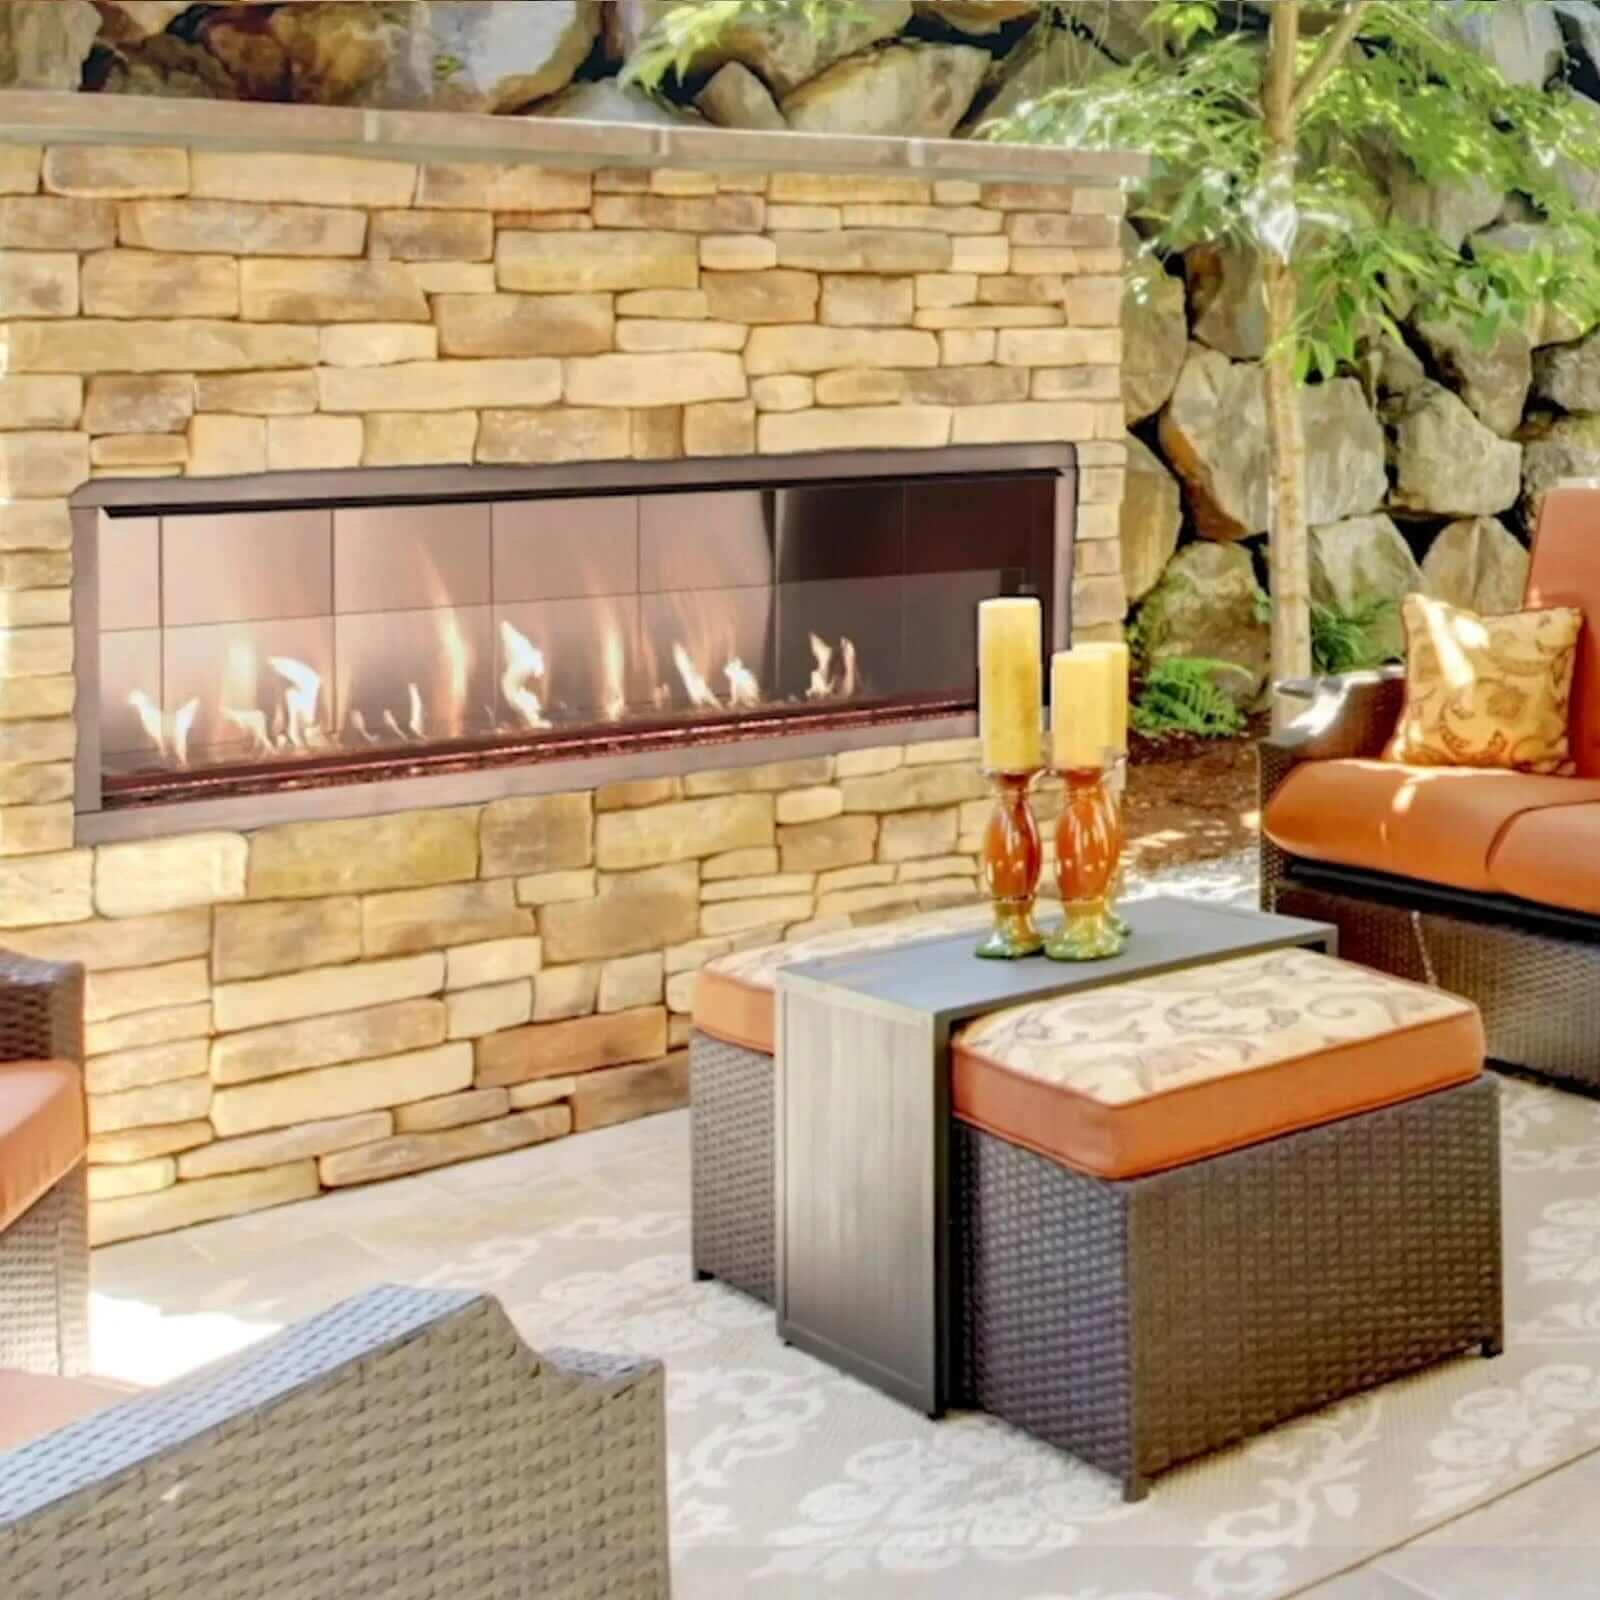 Fireplace in the outdoor with sofa